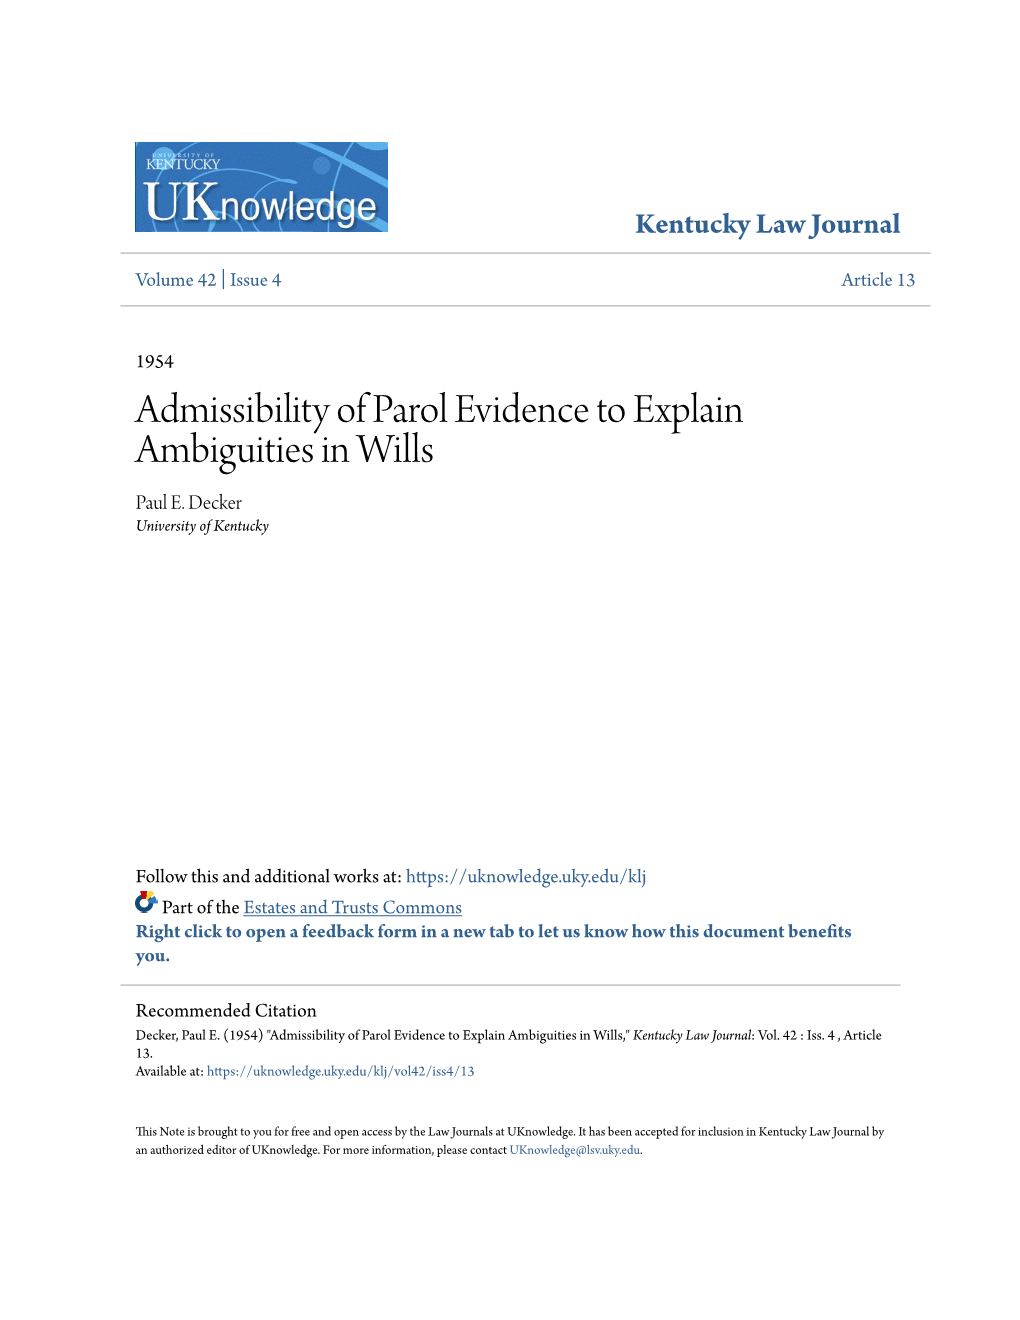 Admissibility of Parol Evidence to Explain Ambiguities in Wills Paul E